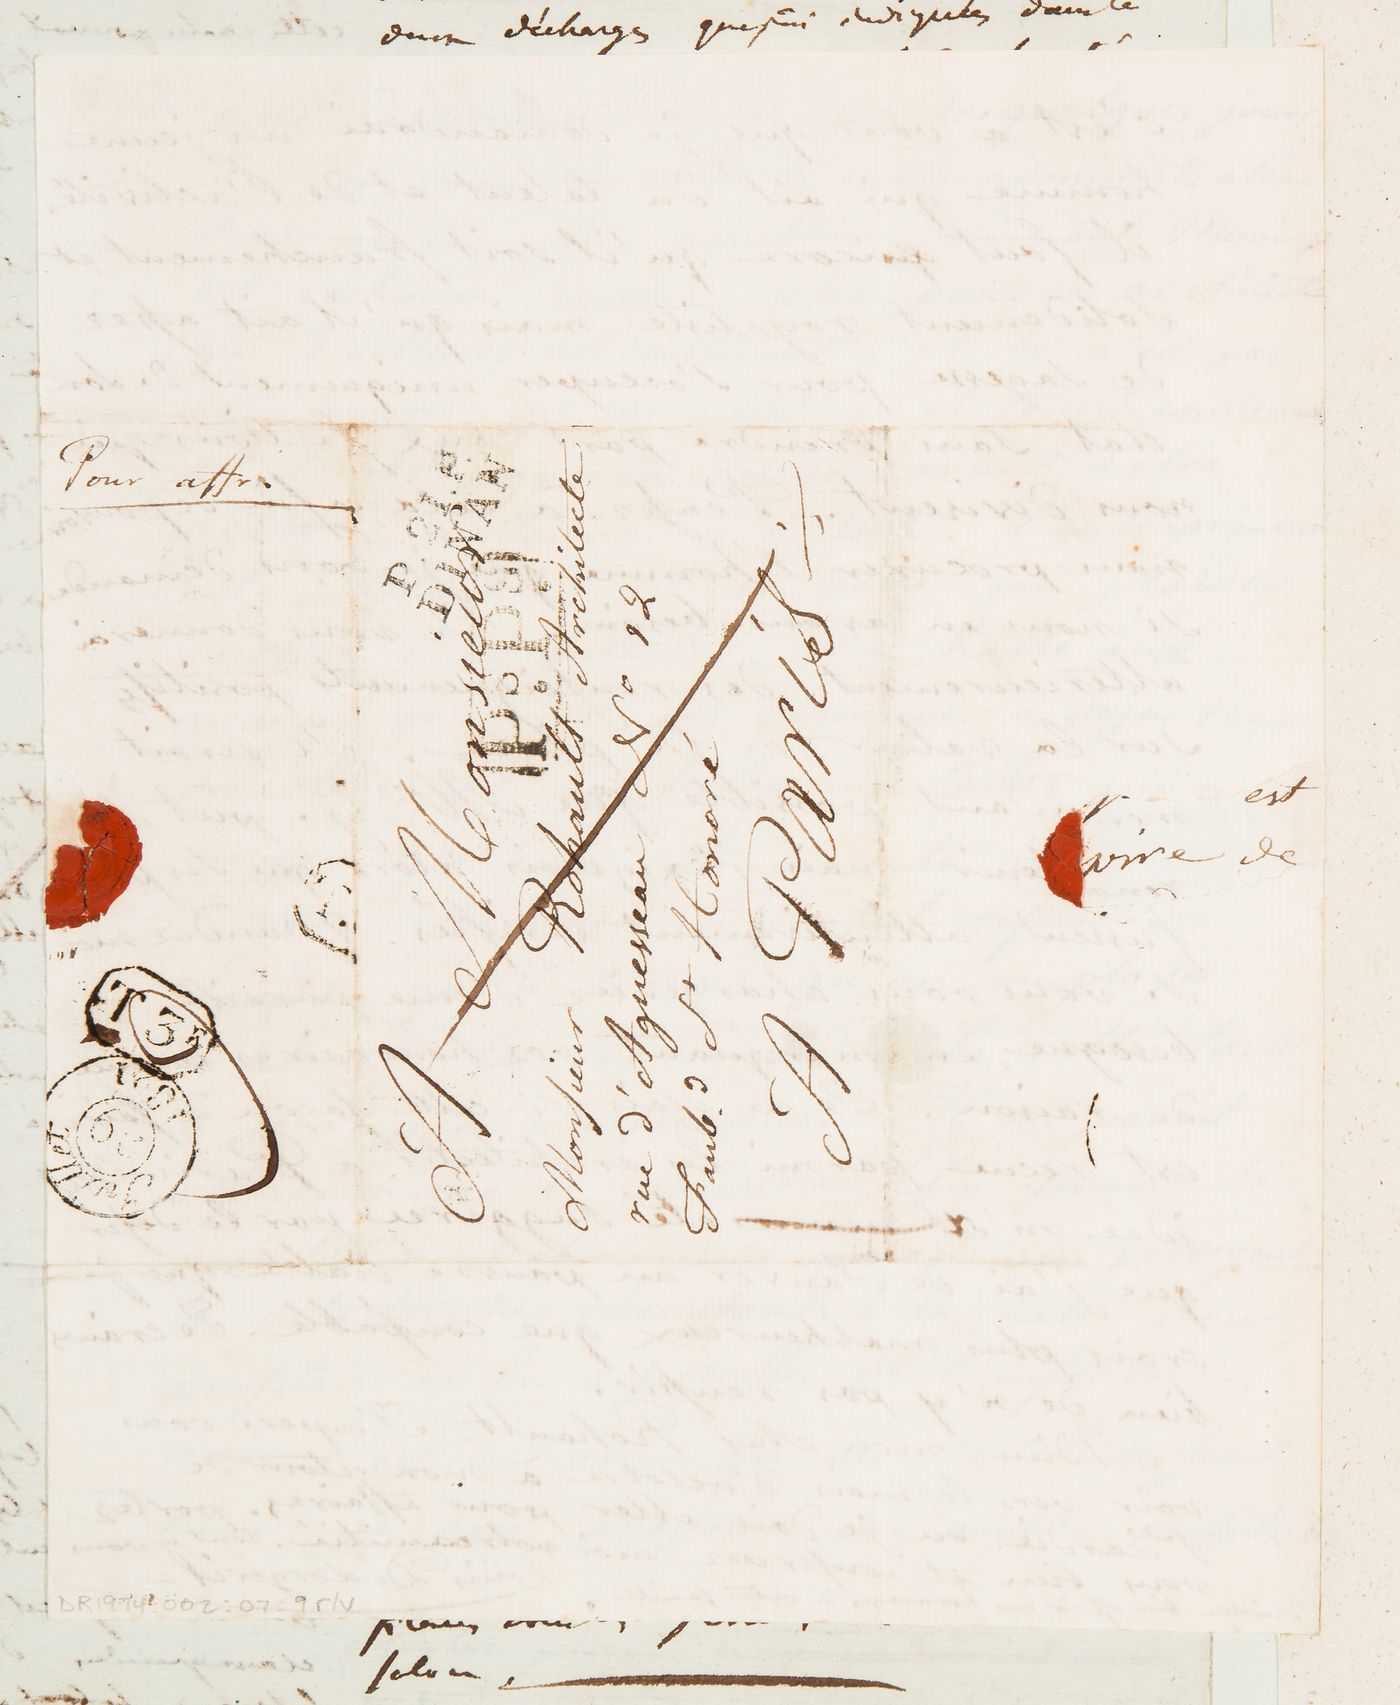 Letter from M. de Lorgeril to Hubert Rohault de Fleury concerning an apartment house for the de Lorgeril family in Rennes and municipal affairs of Rennes, 25 July 1821